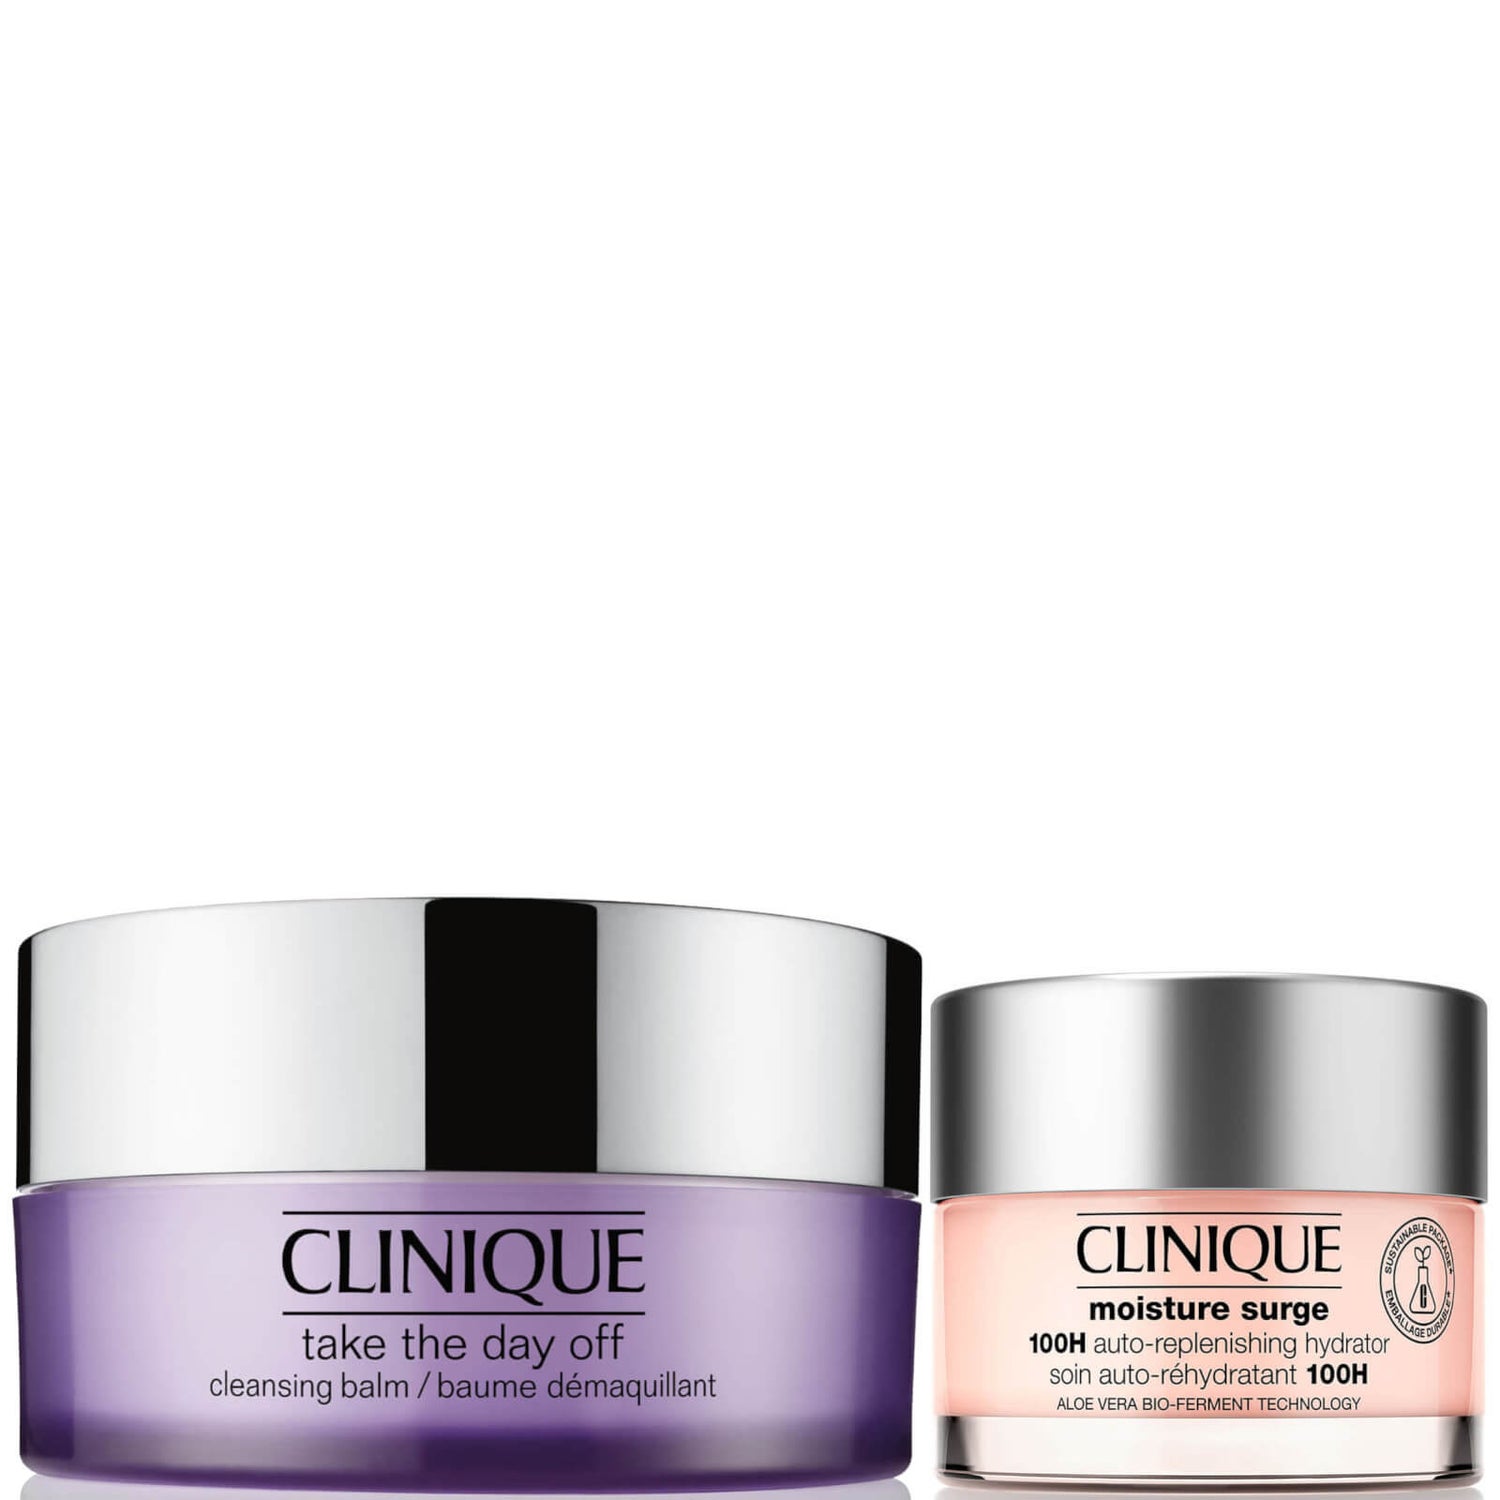 Clinique LF Exclusive Cleanse and Care Face Bundle (Worth €69.00)